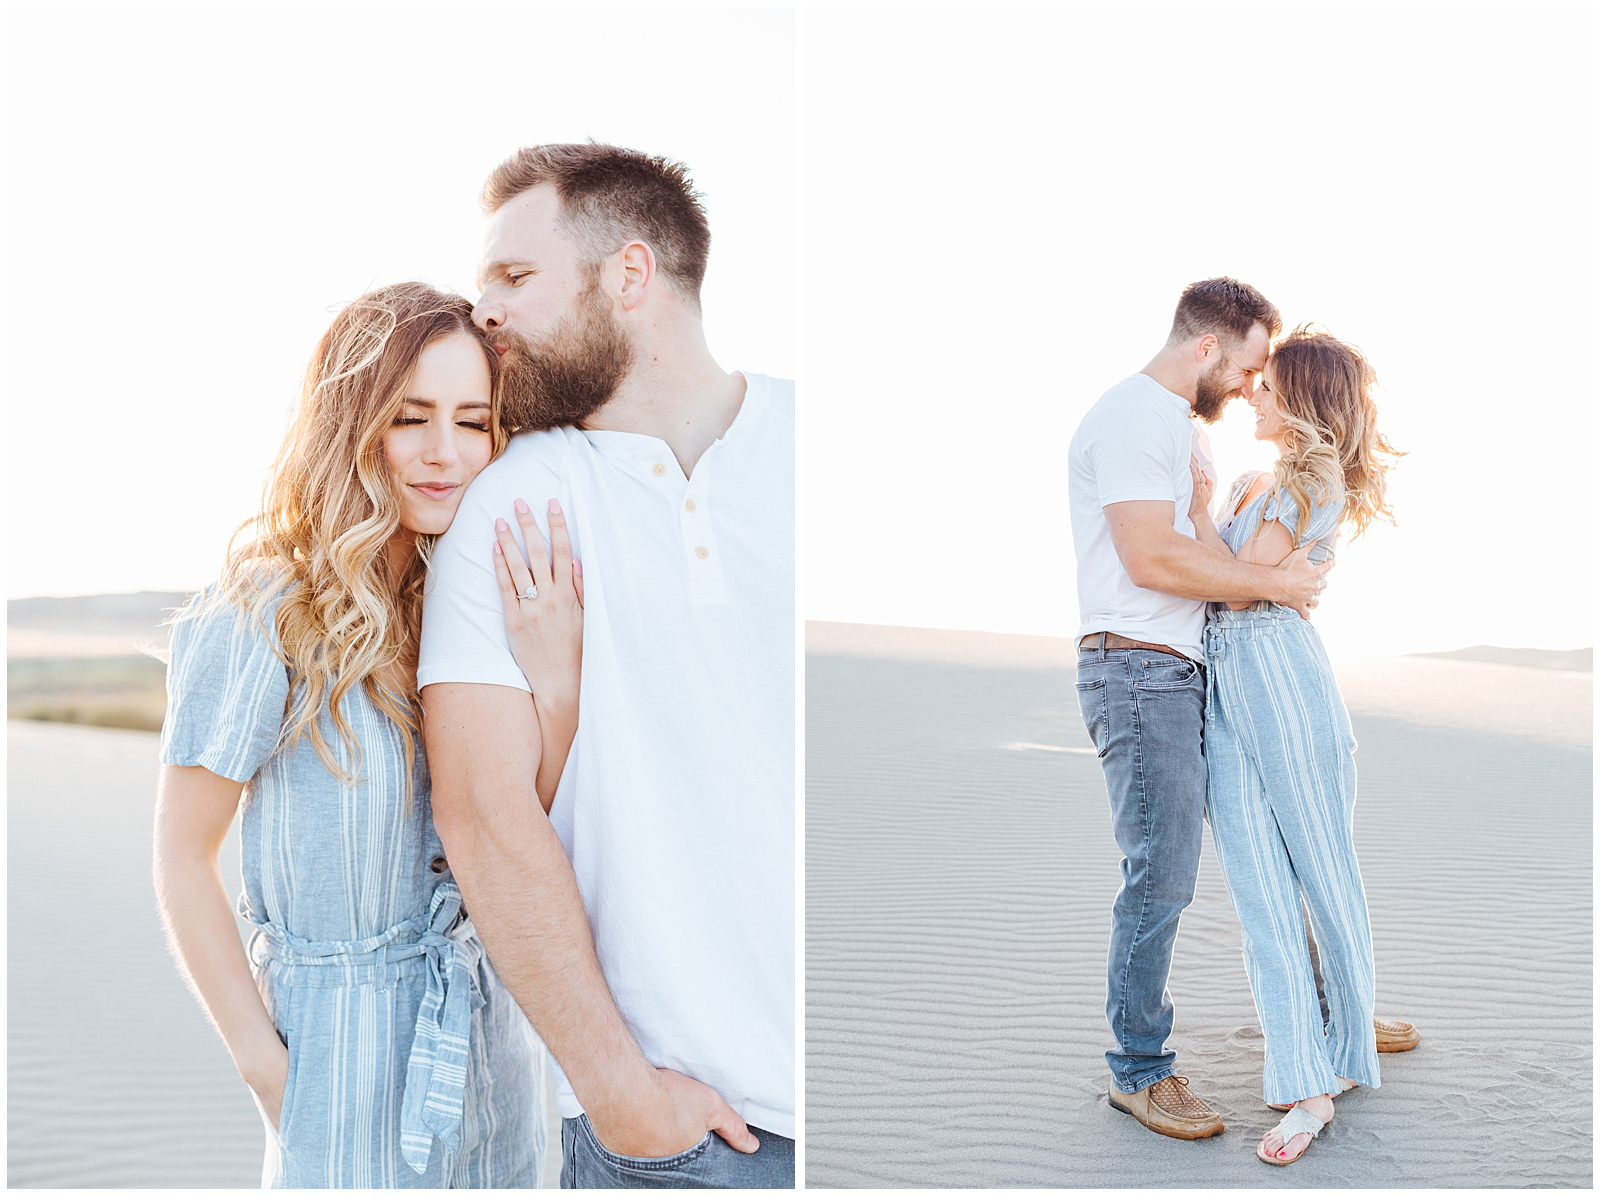 Beachy Light and Airy Sand Dunes Engagement Photos